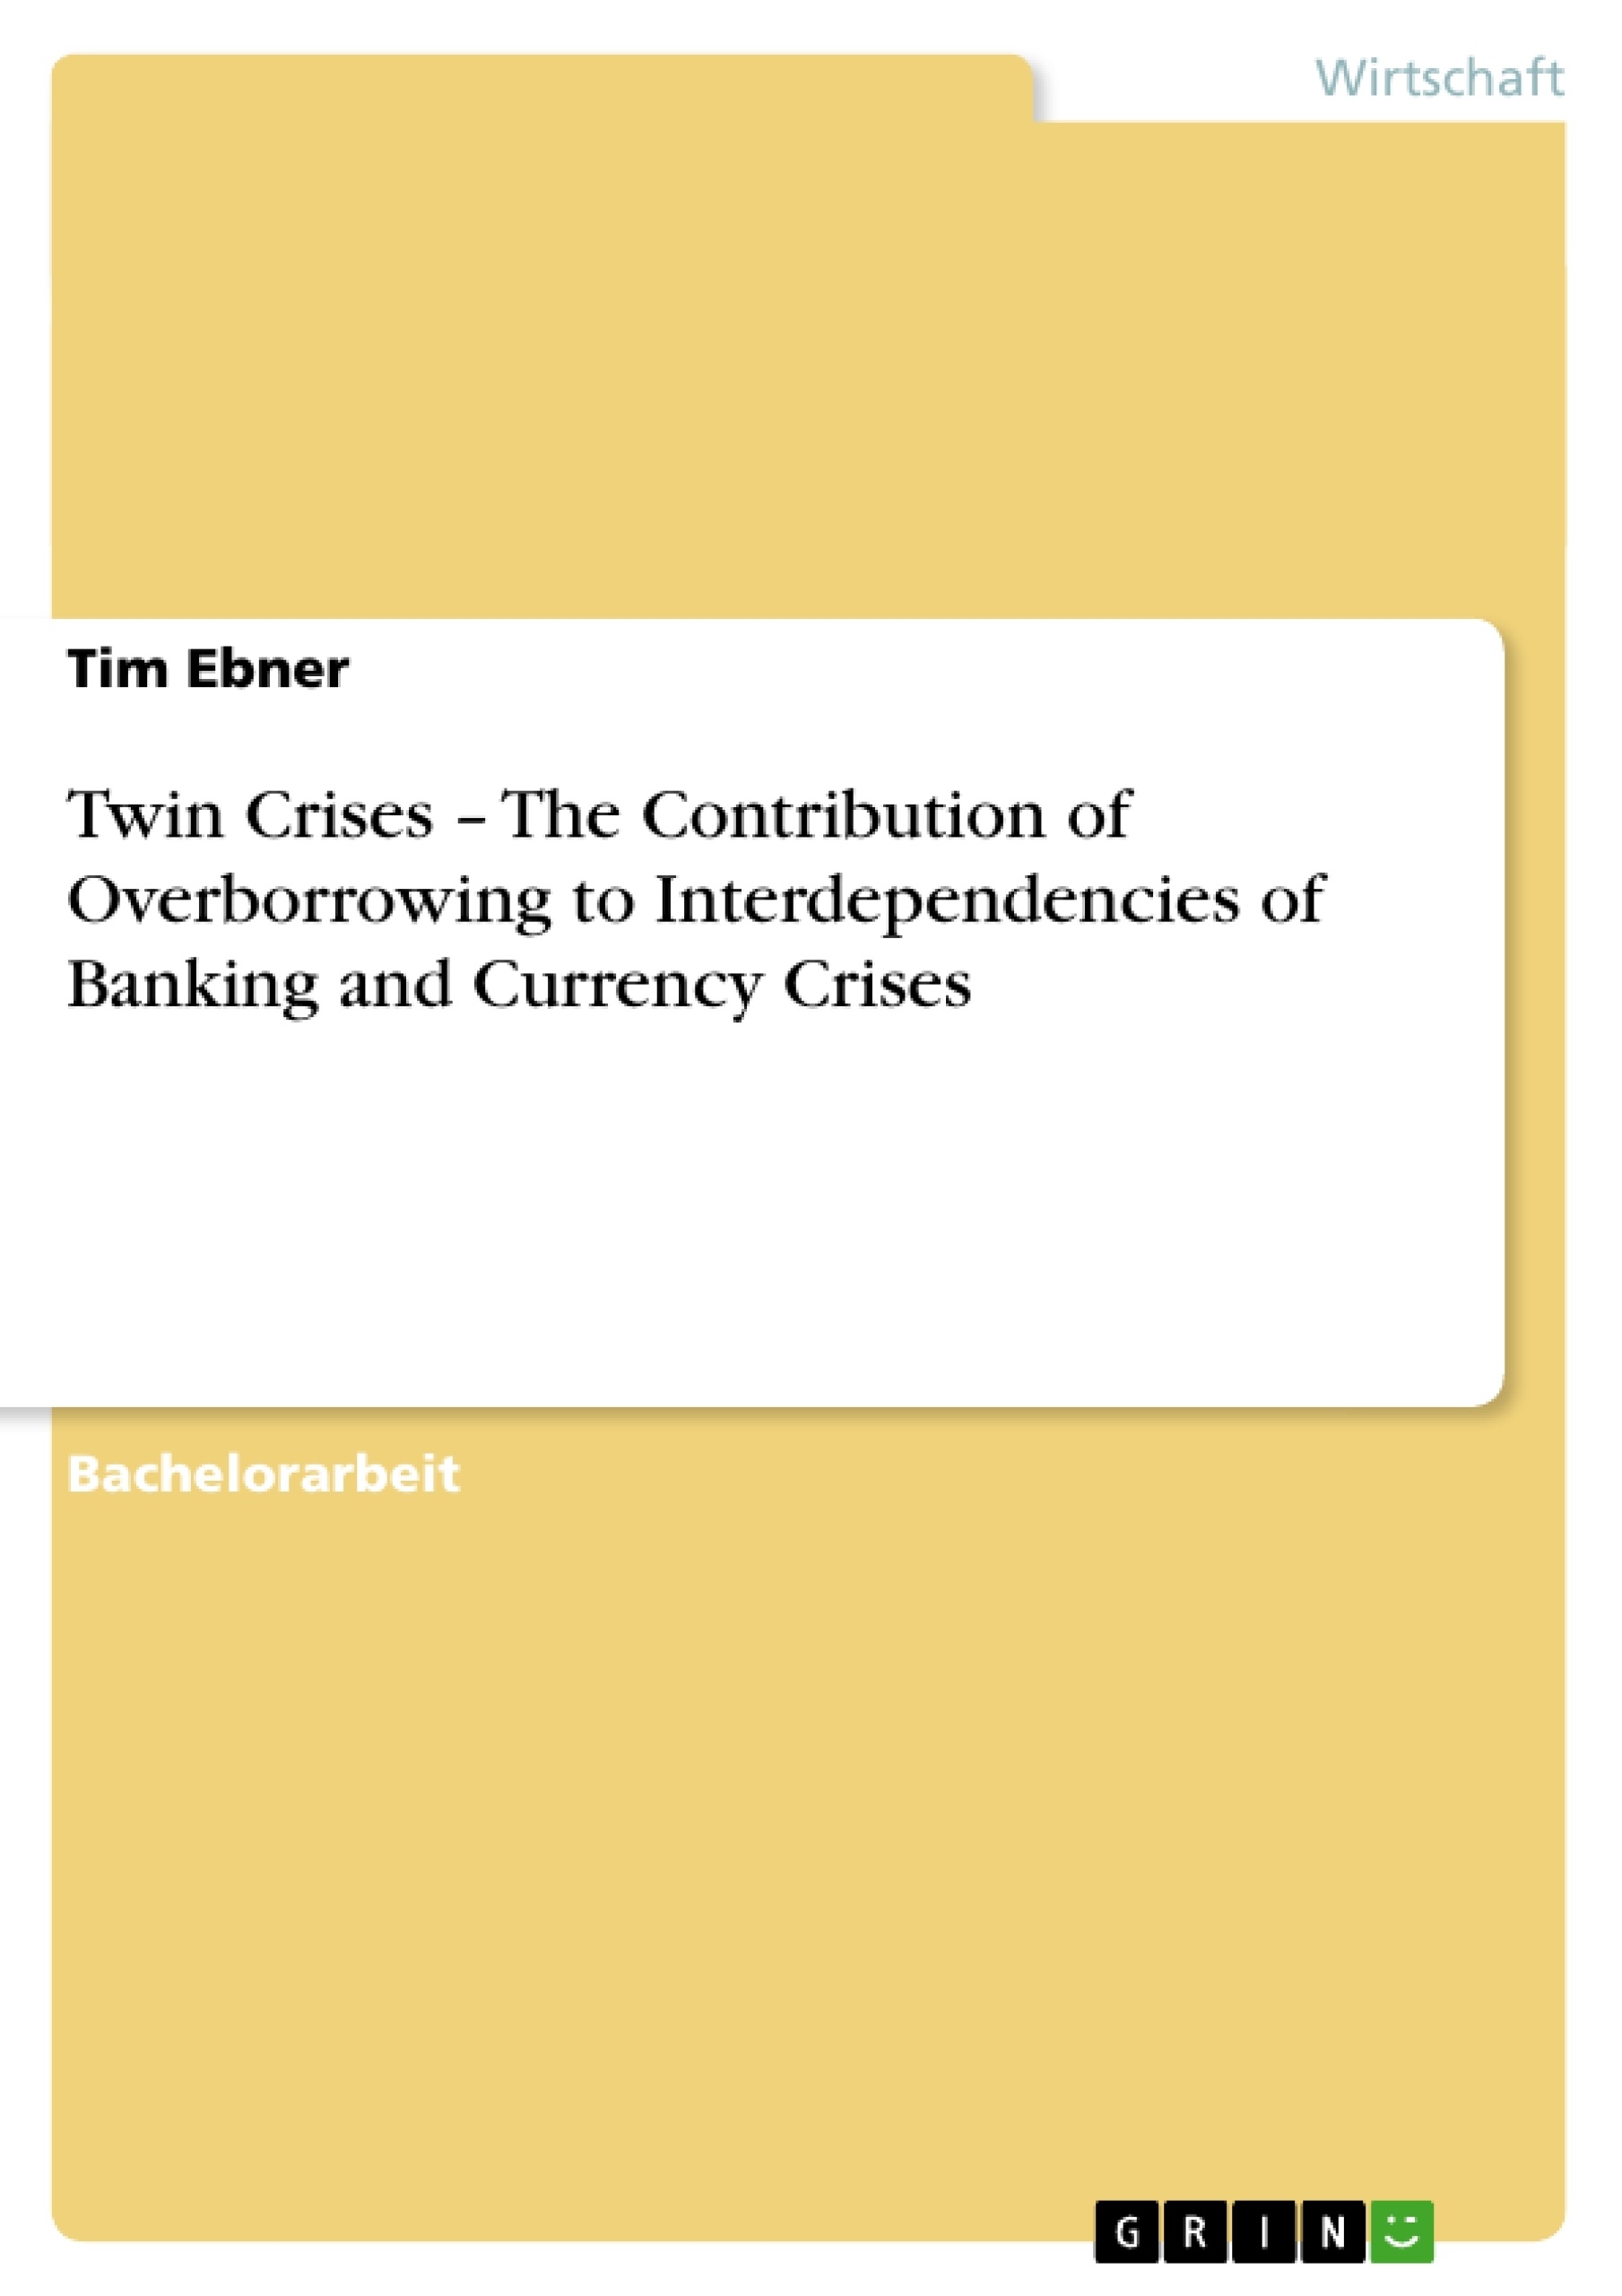 Titel: Twin Crises – The Contribution of Overborrowing to Interdependencies of Banking and Currency Crises